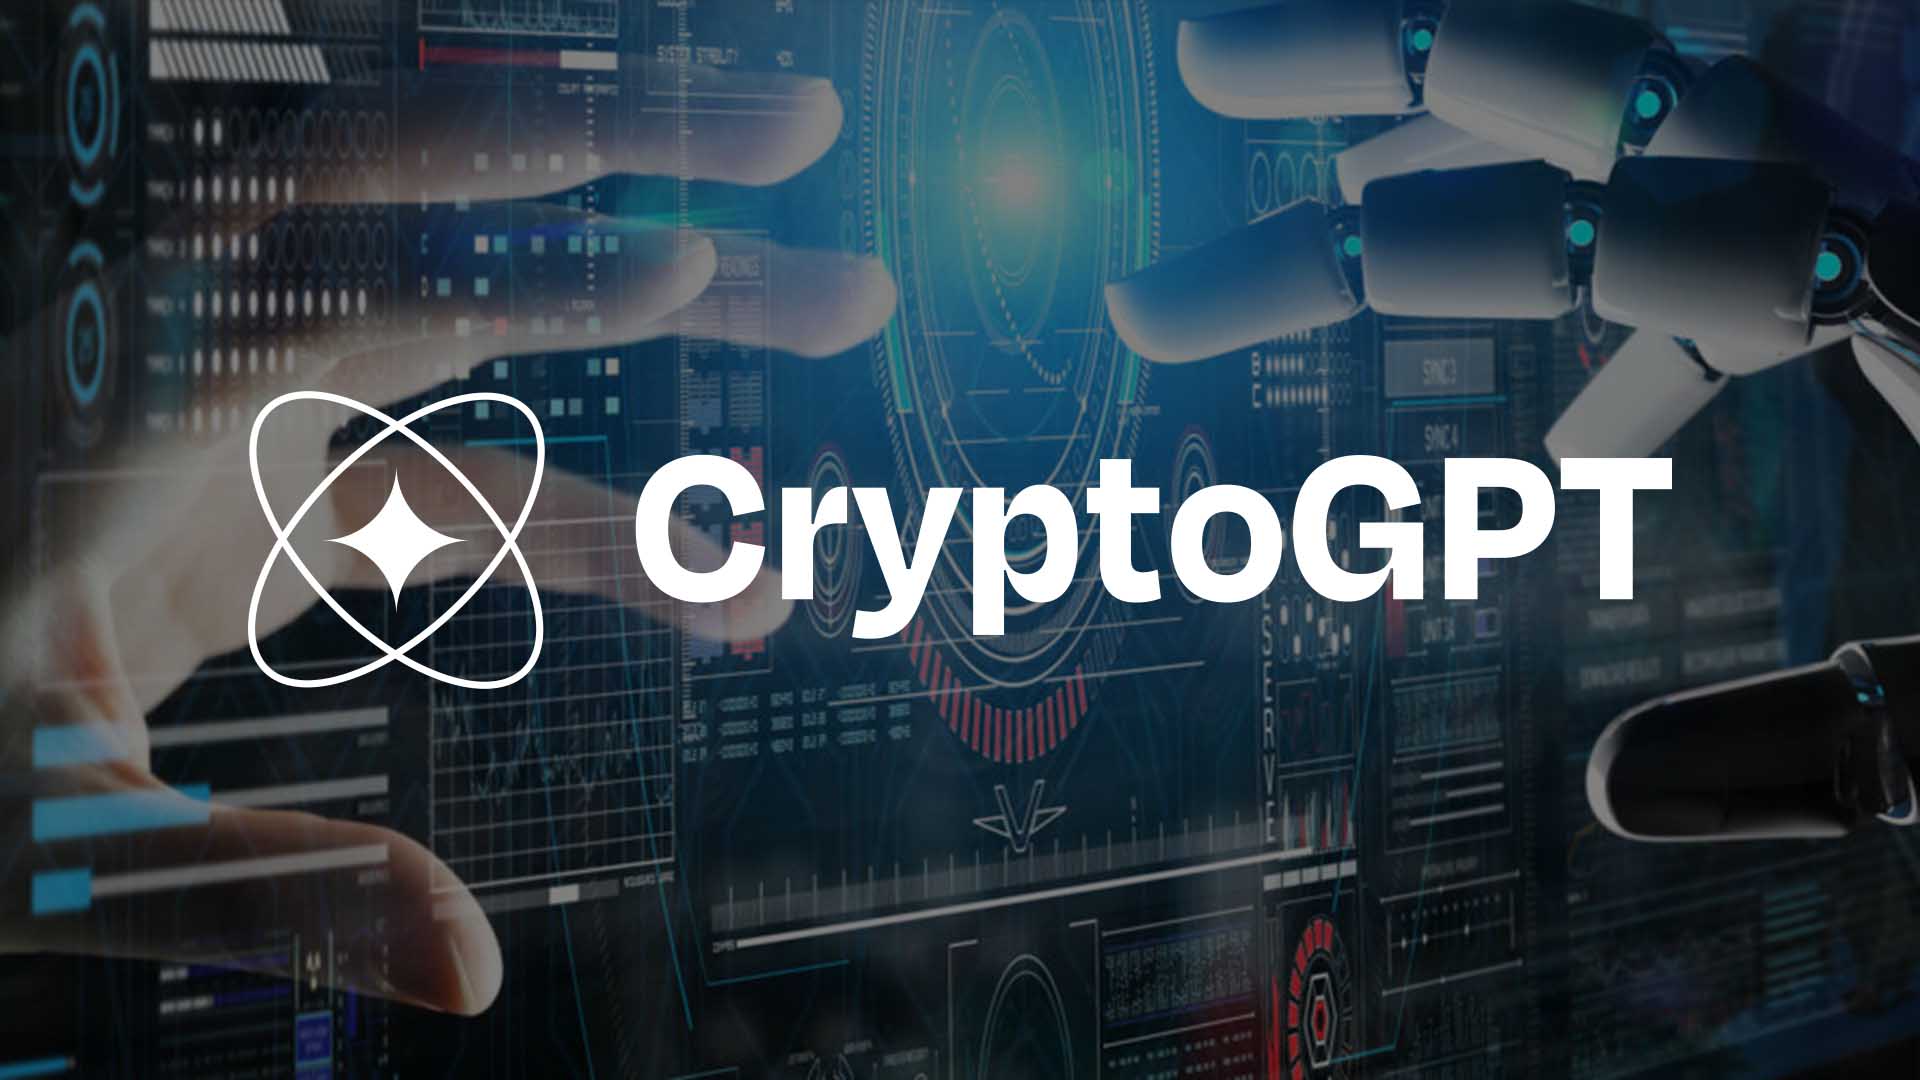 CryptoGPT raises funds at a $250 million token valuation